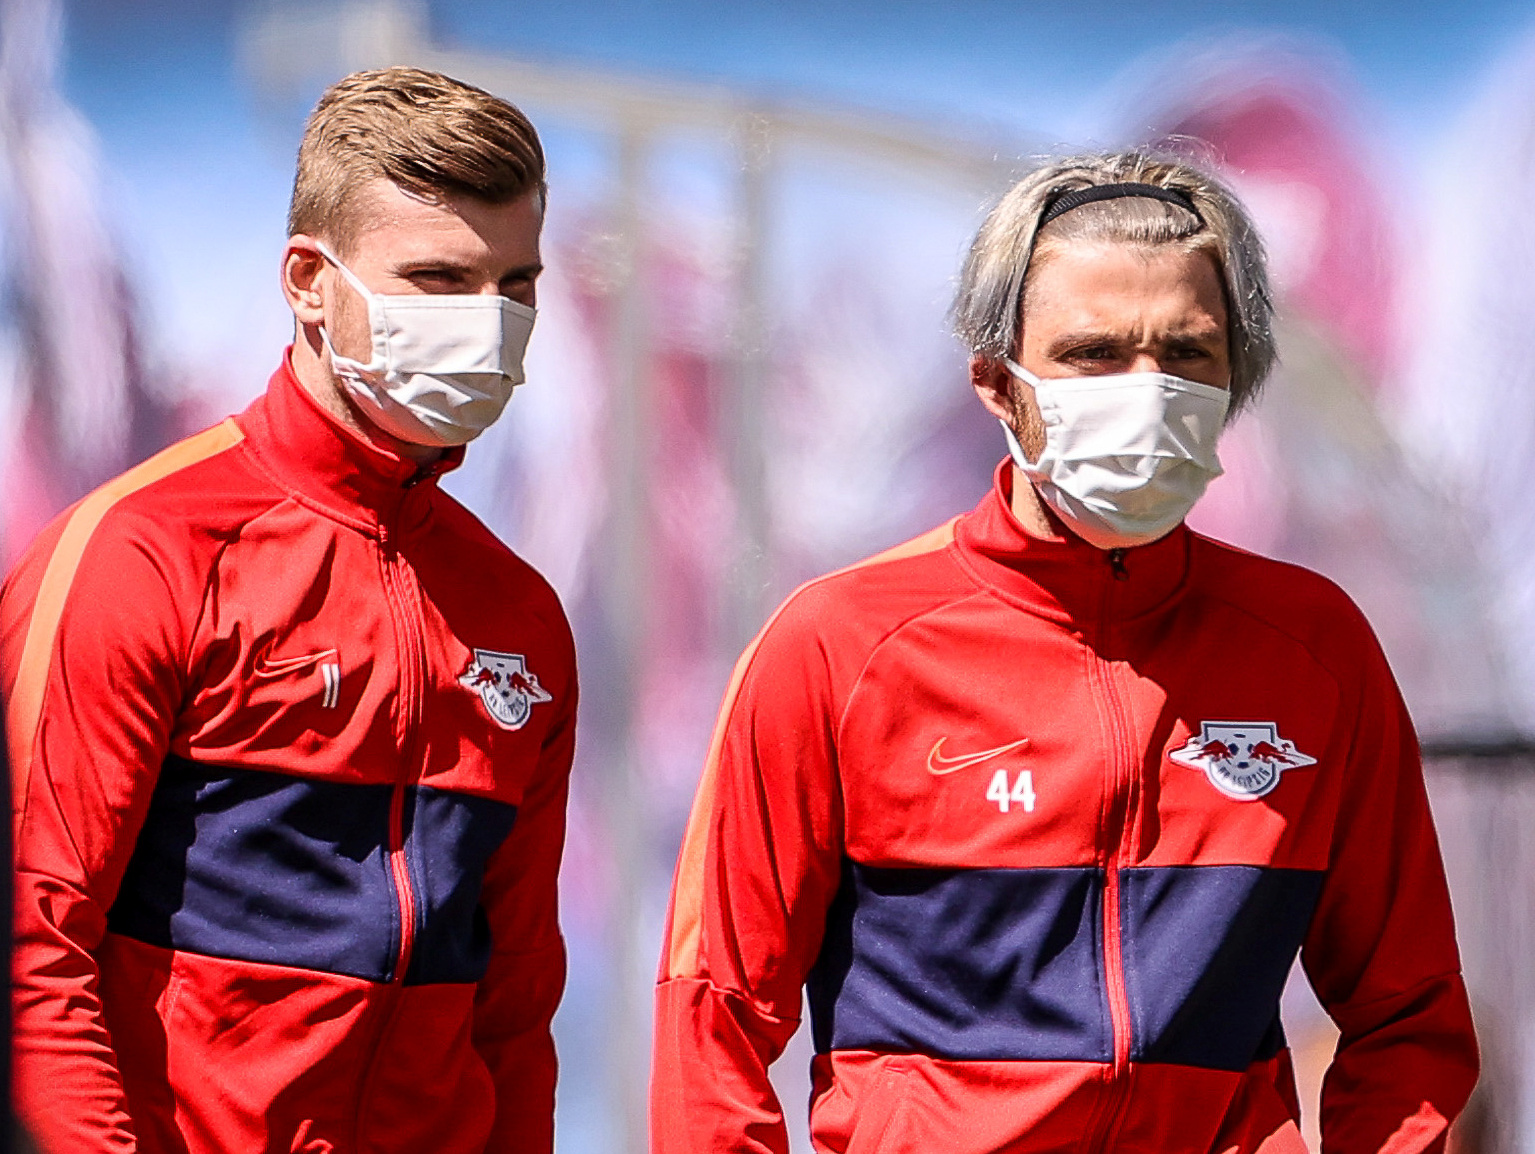 Soccer Football - Bundesliga - RB Leipzig v SC Freiburg - Red Bull Arena, Leipzig, Germany - May 16, 2020 RB Leipzig's Kevin Kampl and Timo Werner wearing protective face mask before the match, as play resumes following the outbreak of the coronavirus disease (COVID-19) Jan Woitas/Pool via REUTERS  DFL regulations prohibit any use of photographs as image sequences and/or quasi-video